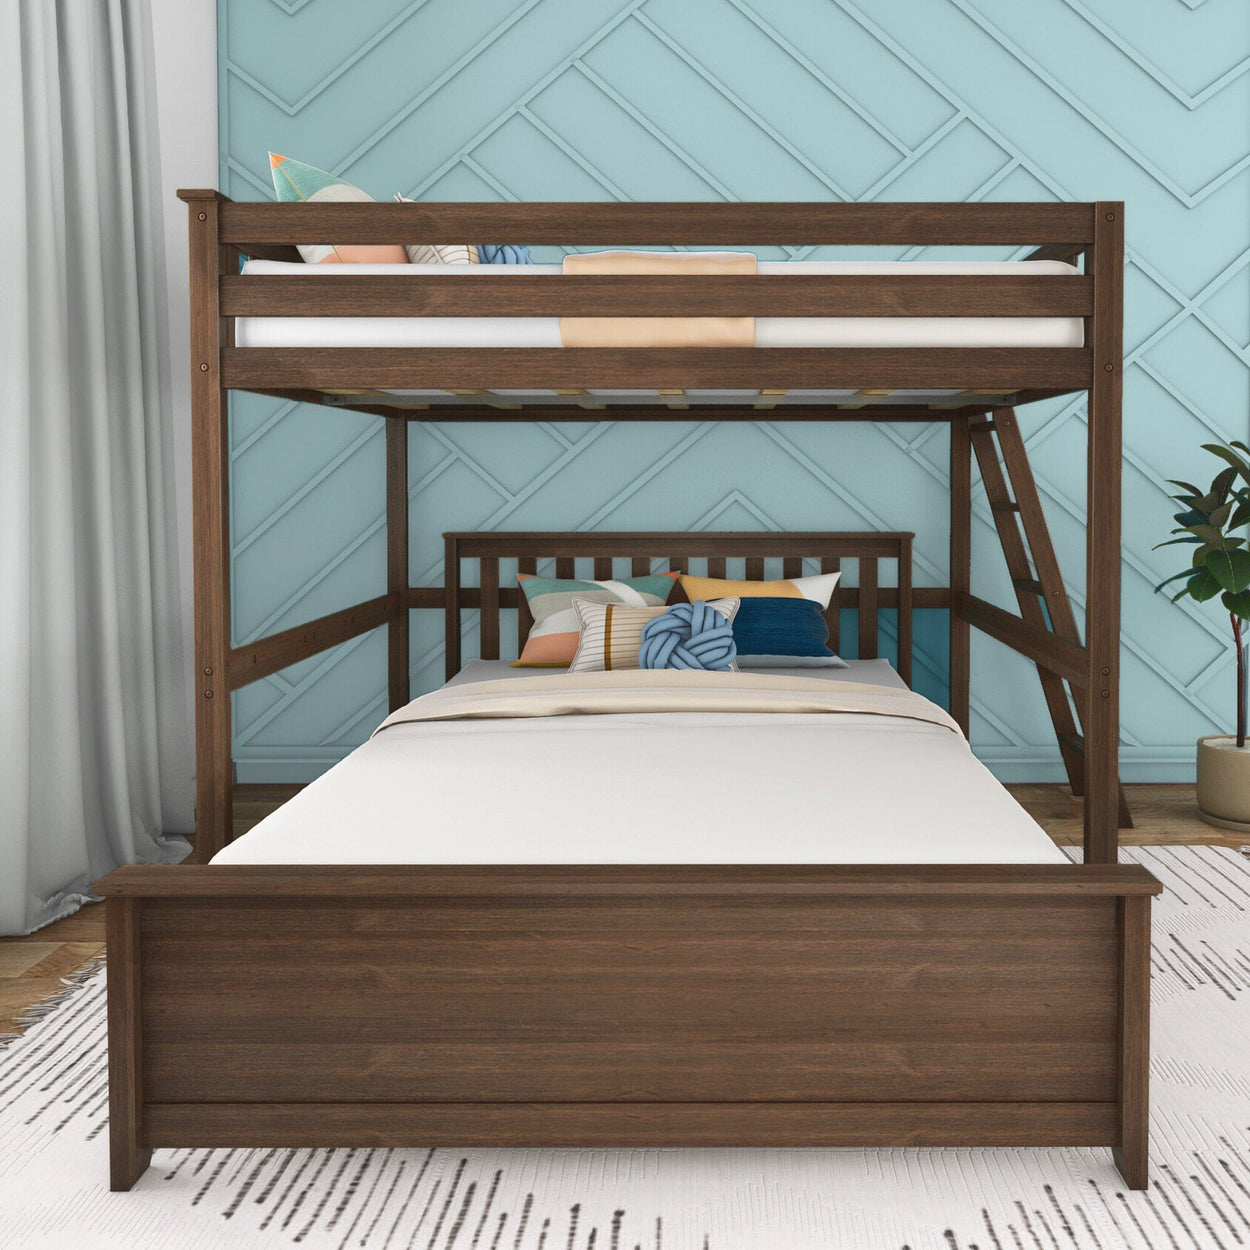 18-733-008 : Bunk Beds L-Shaped Full over Queen Bunk Bed with Ladder on End, Walnut